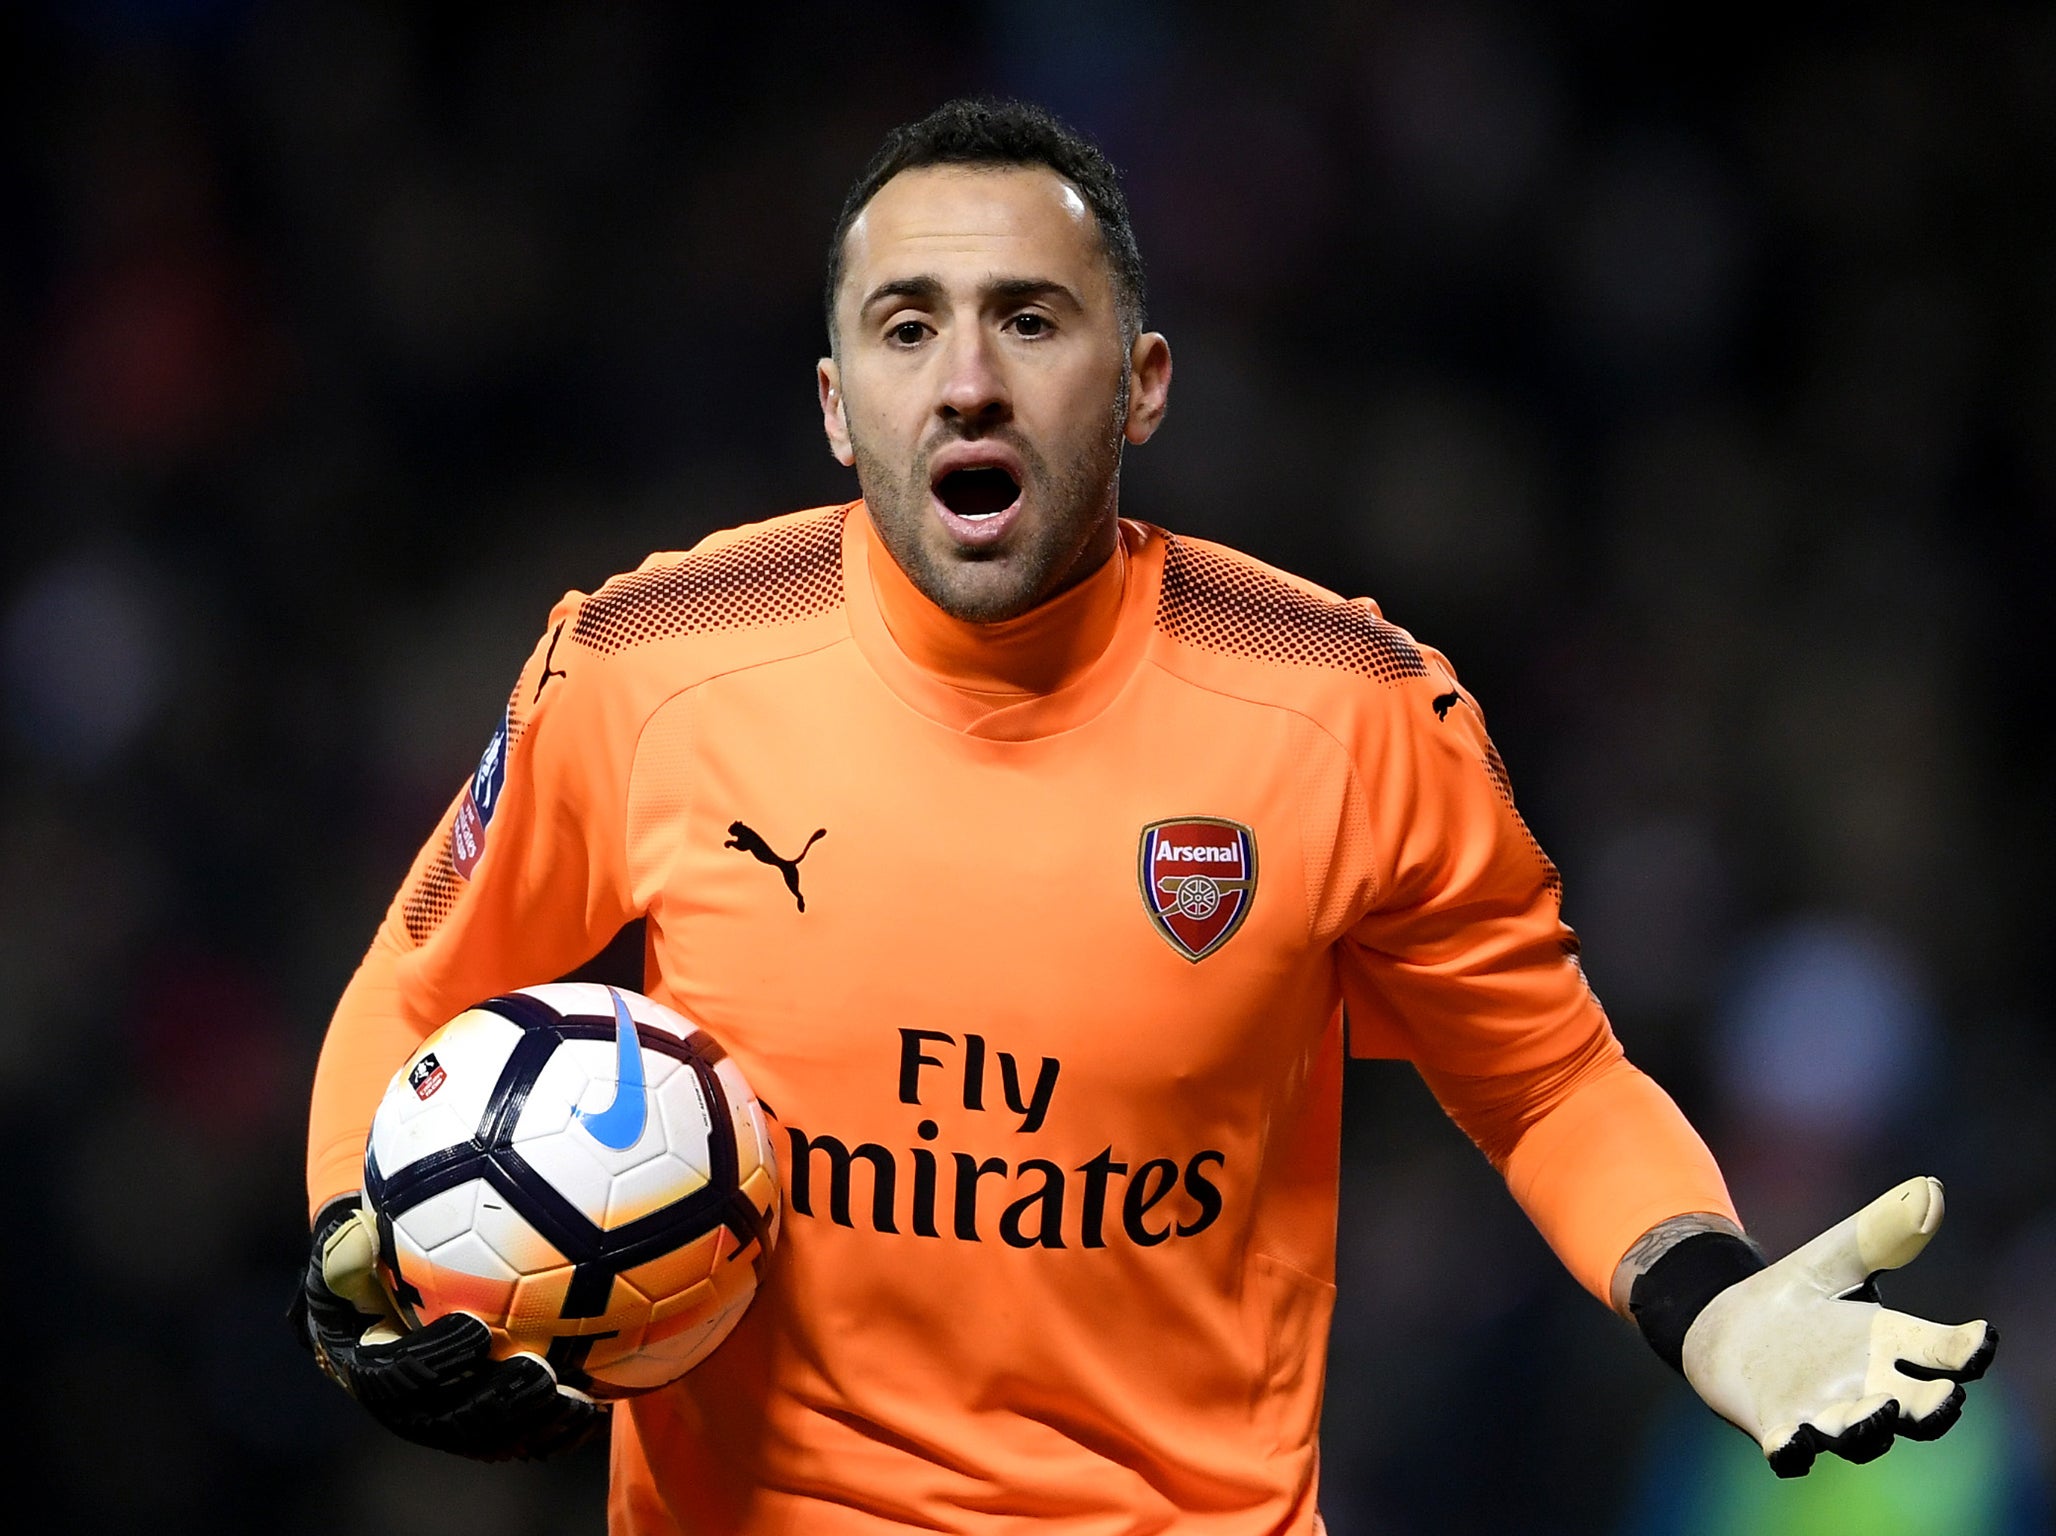 David Ospina will keep his place in Arsenal's cup team